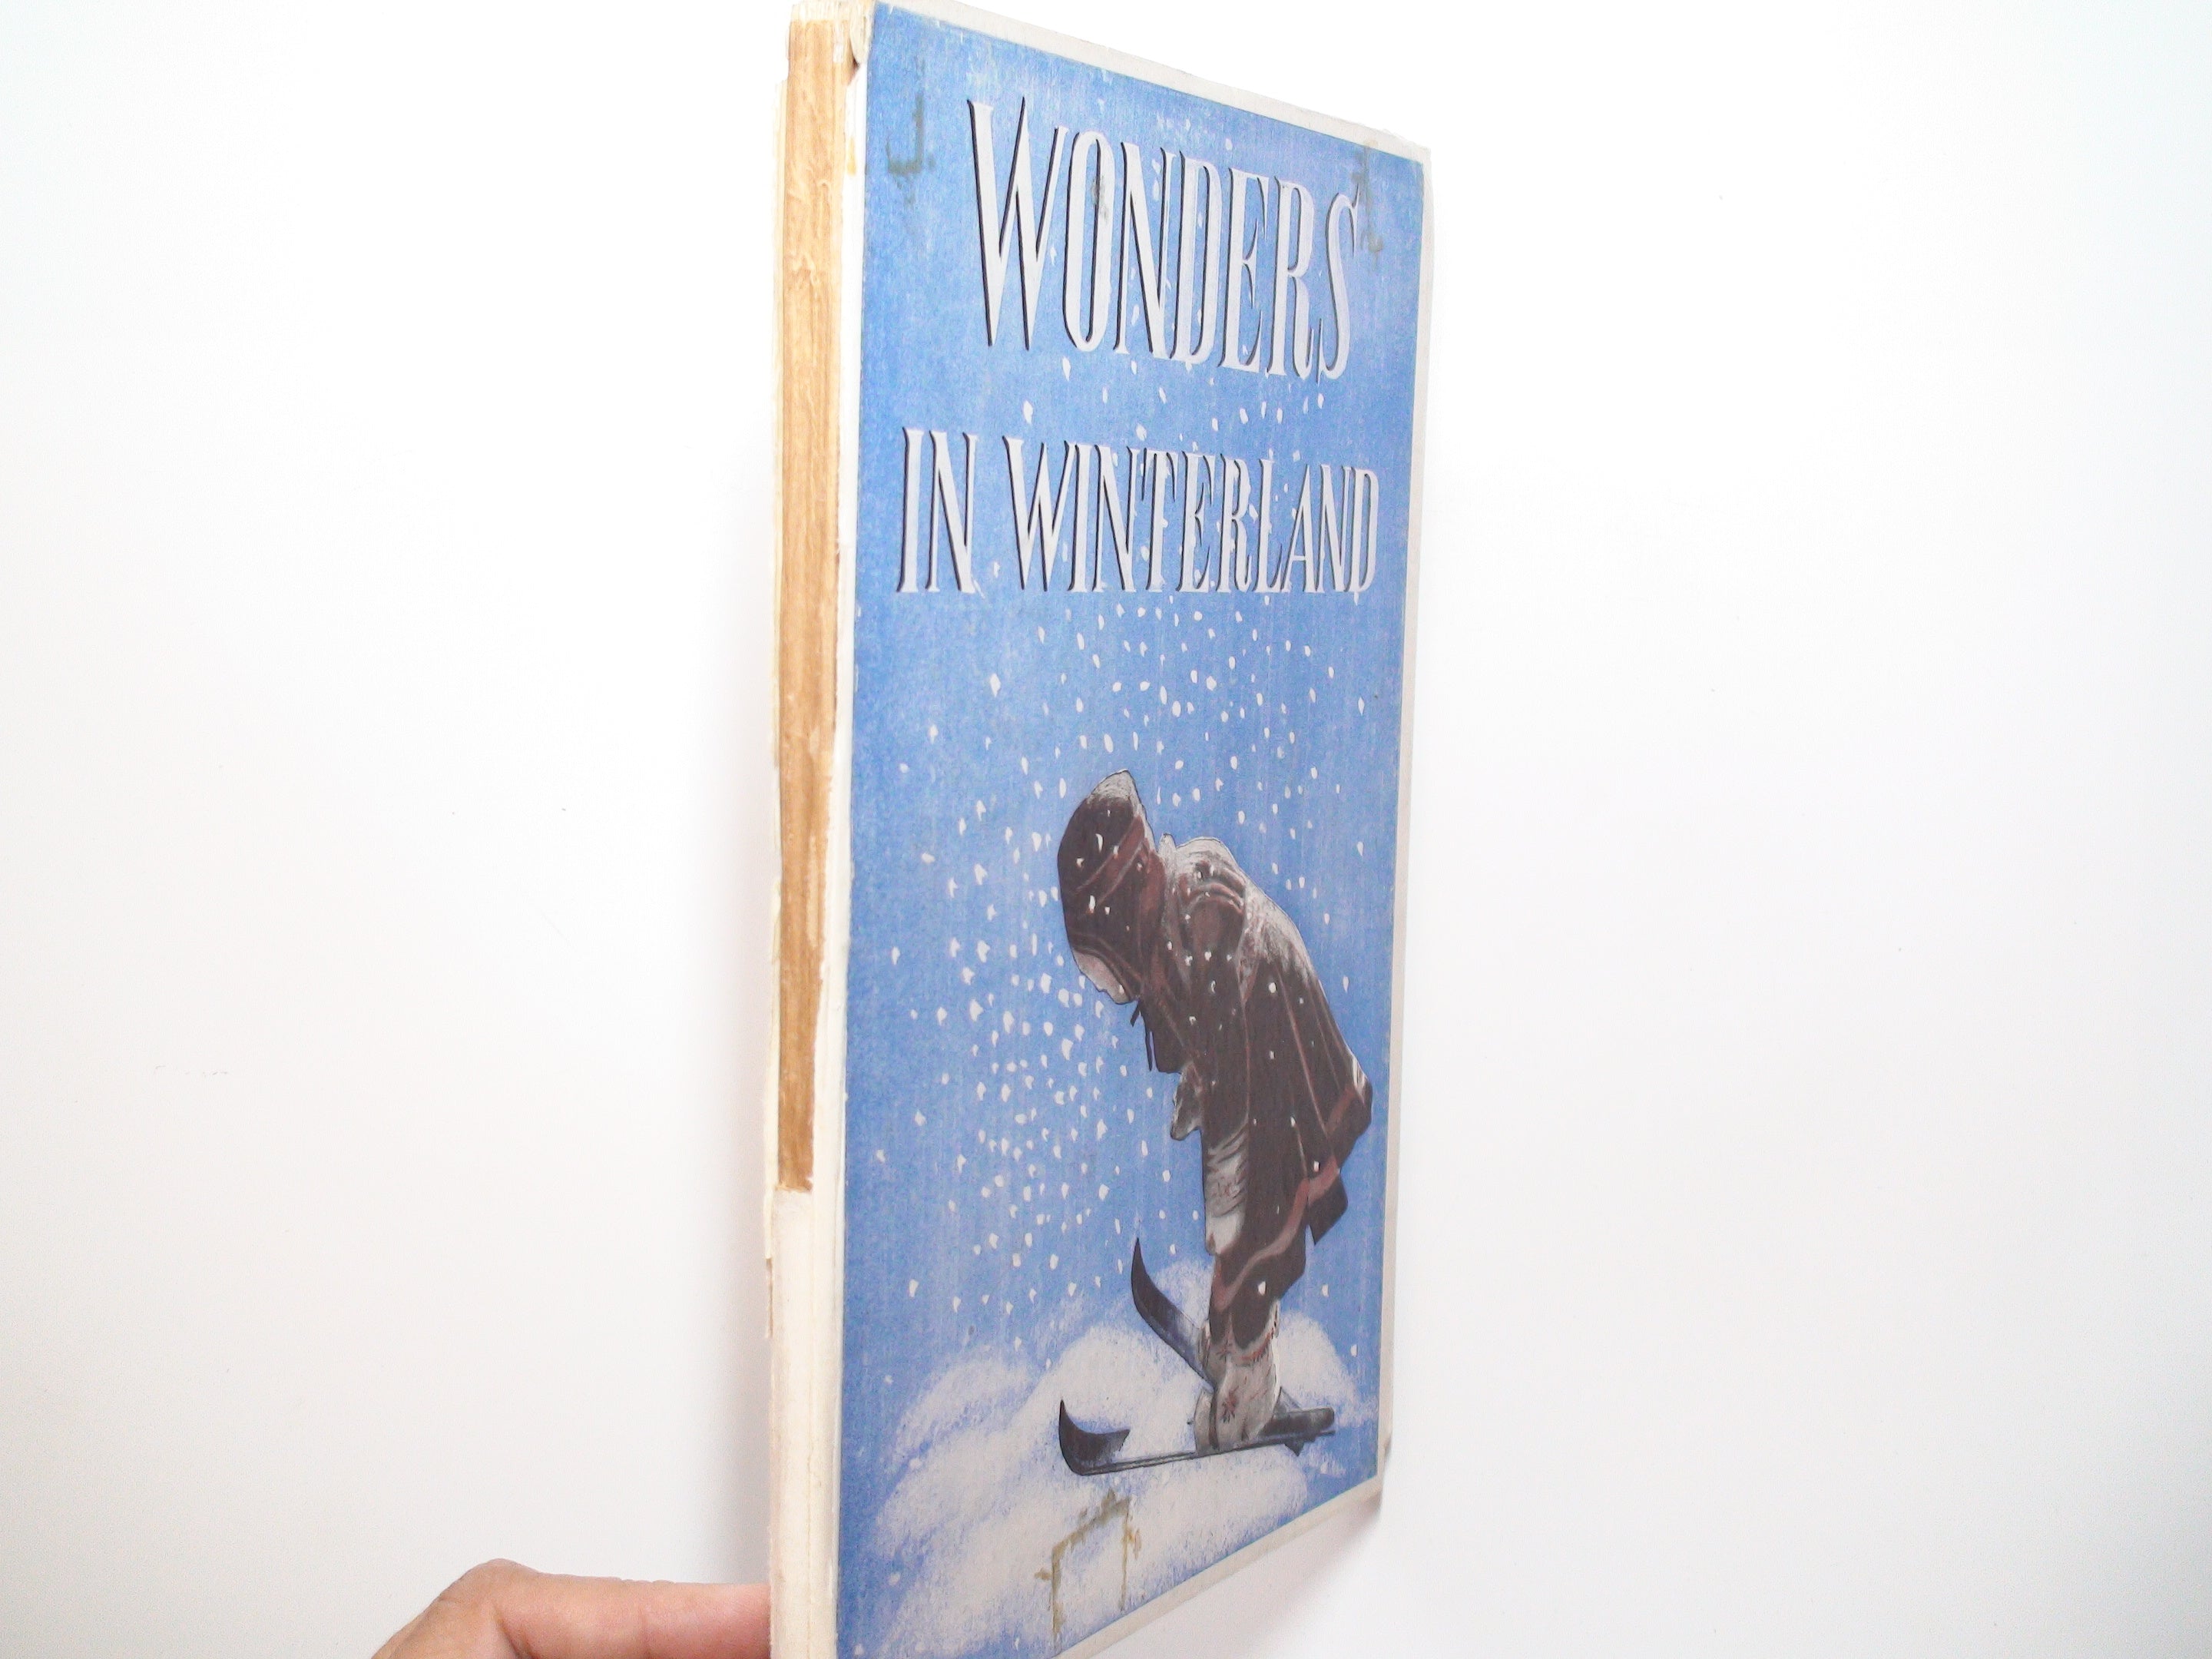 Wonders in Winterland, The White Paradise of Norway, 1st Ed, Illustrated, 1947